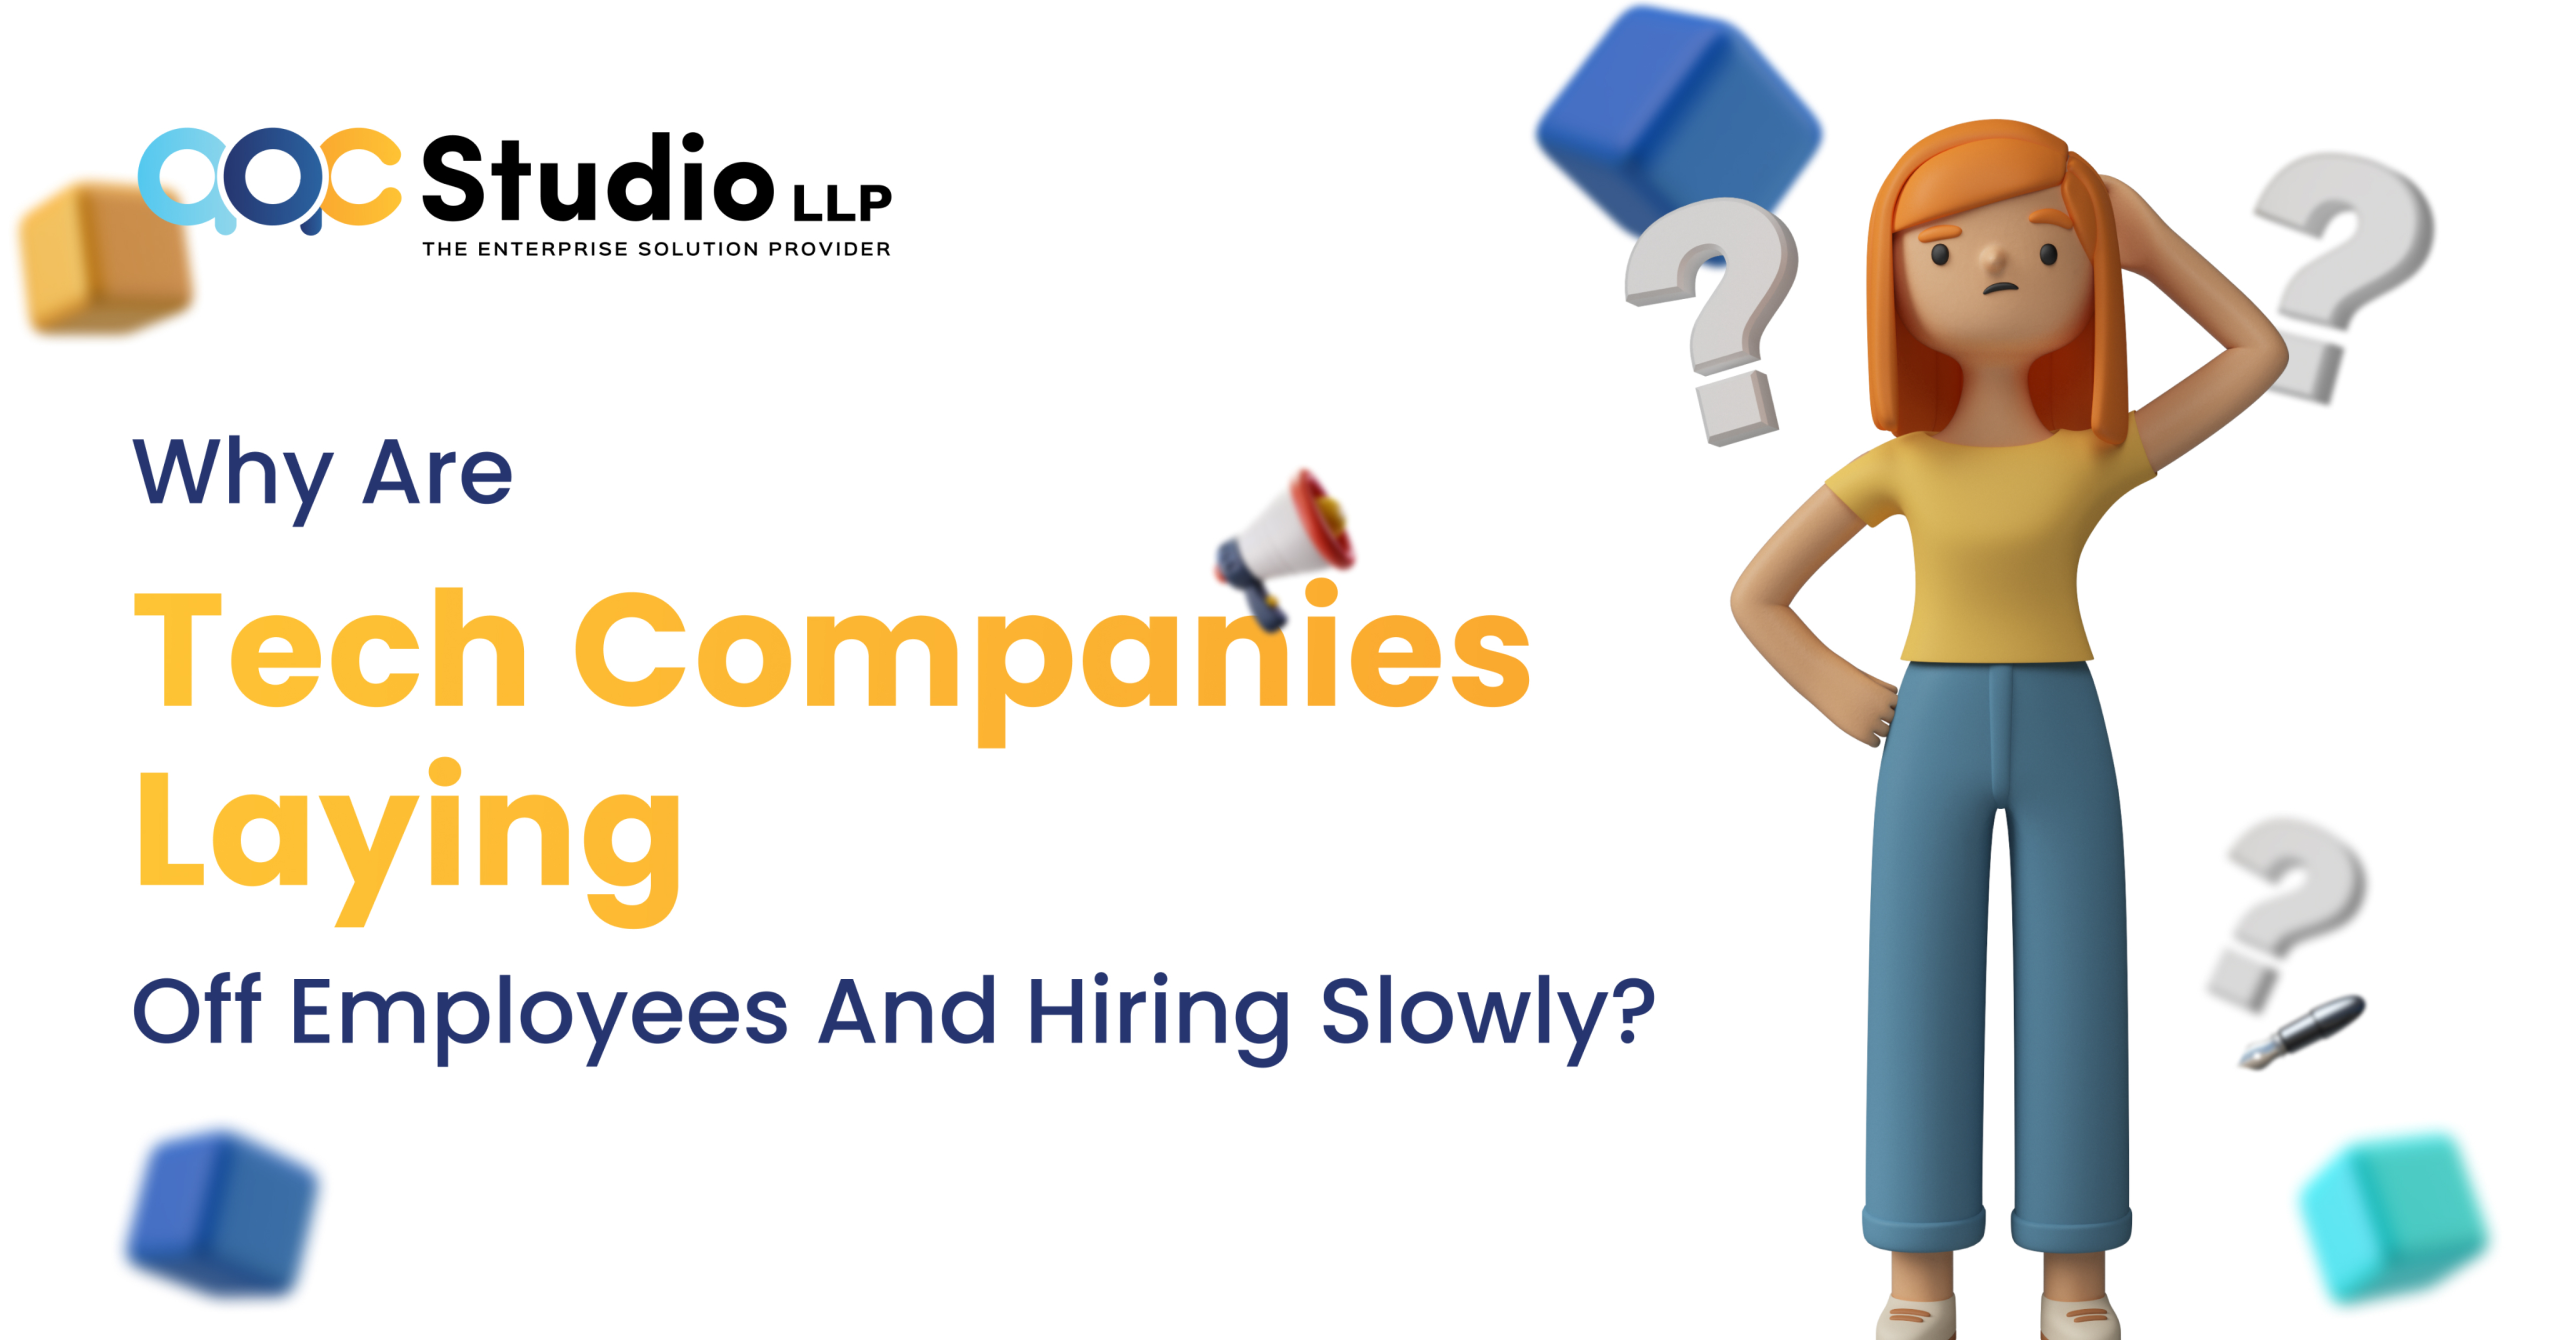 Why Are Tech Companies Laying Off & Hiring Slowly?